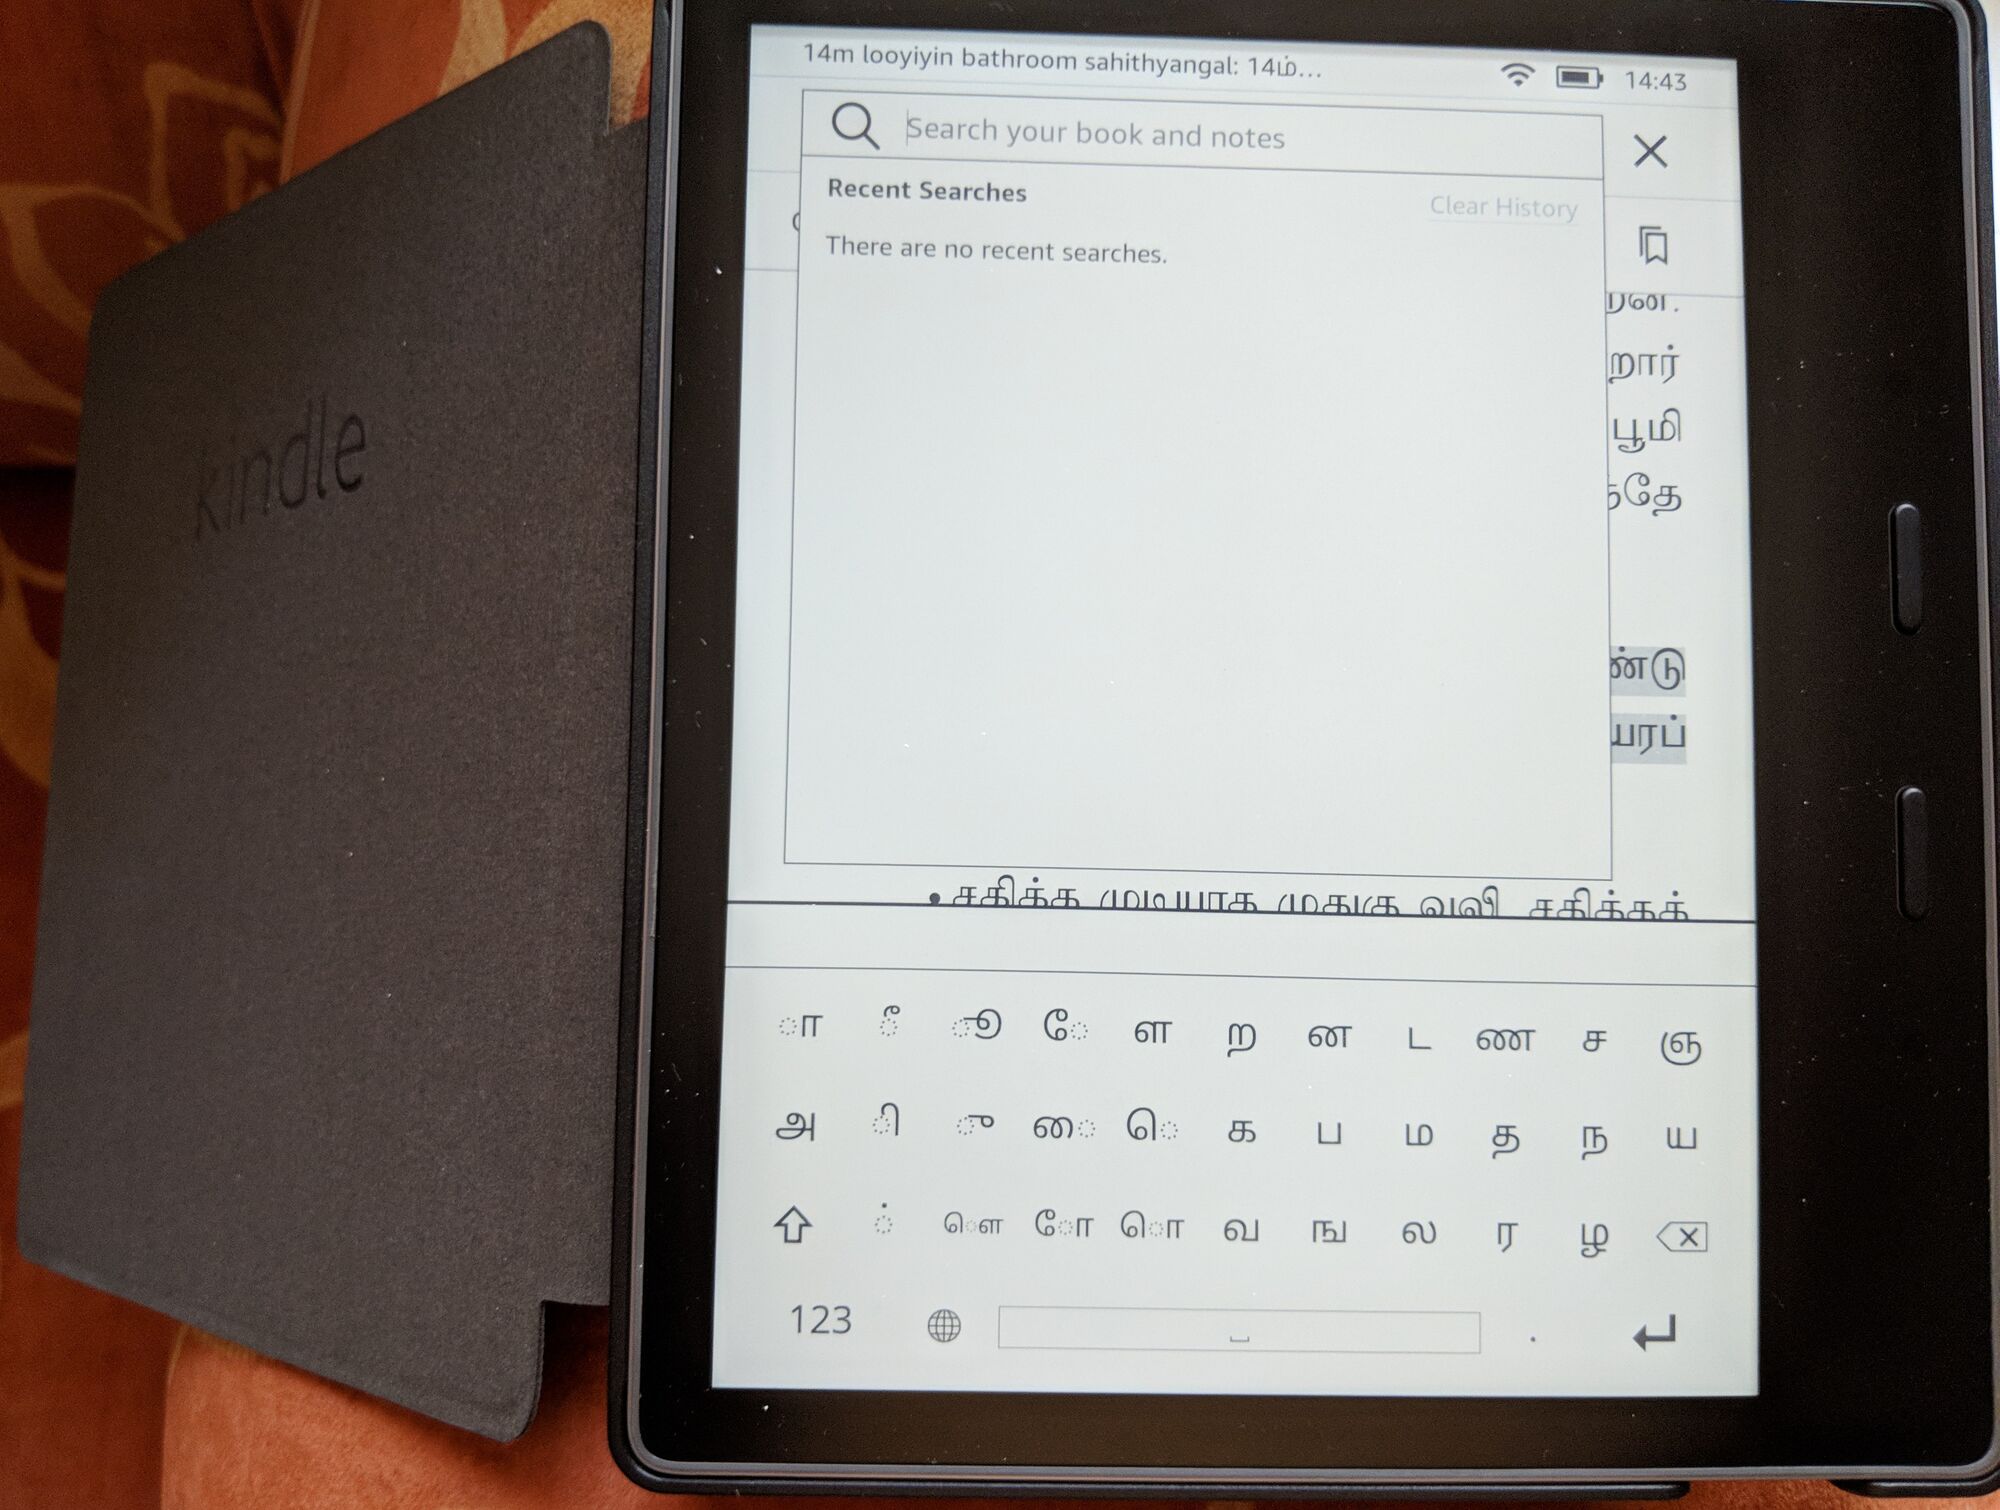 Kindle Oasis 7" showing Tamil text input and search